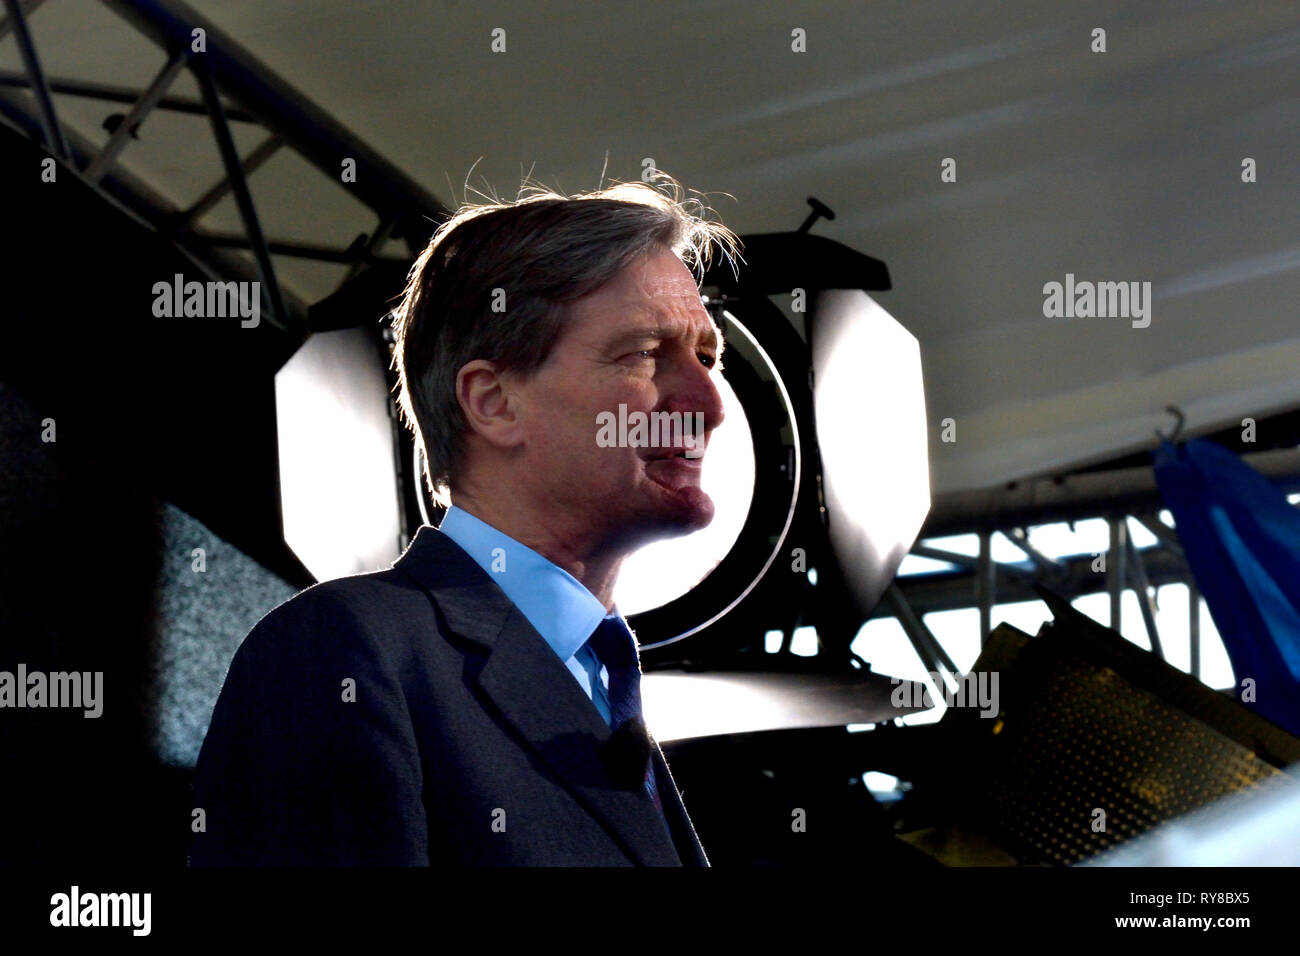 Dominic Grieve MP (Conservative: Beaconsfield) former Attourney General, being interviewed on College Green, Westminster, March 11th 2019 Stock Photo